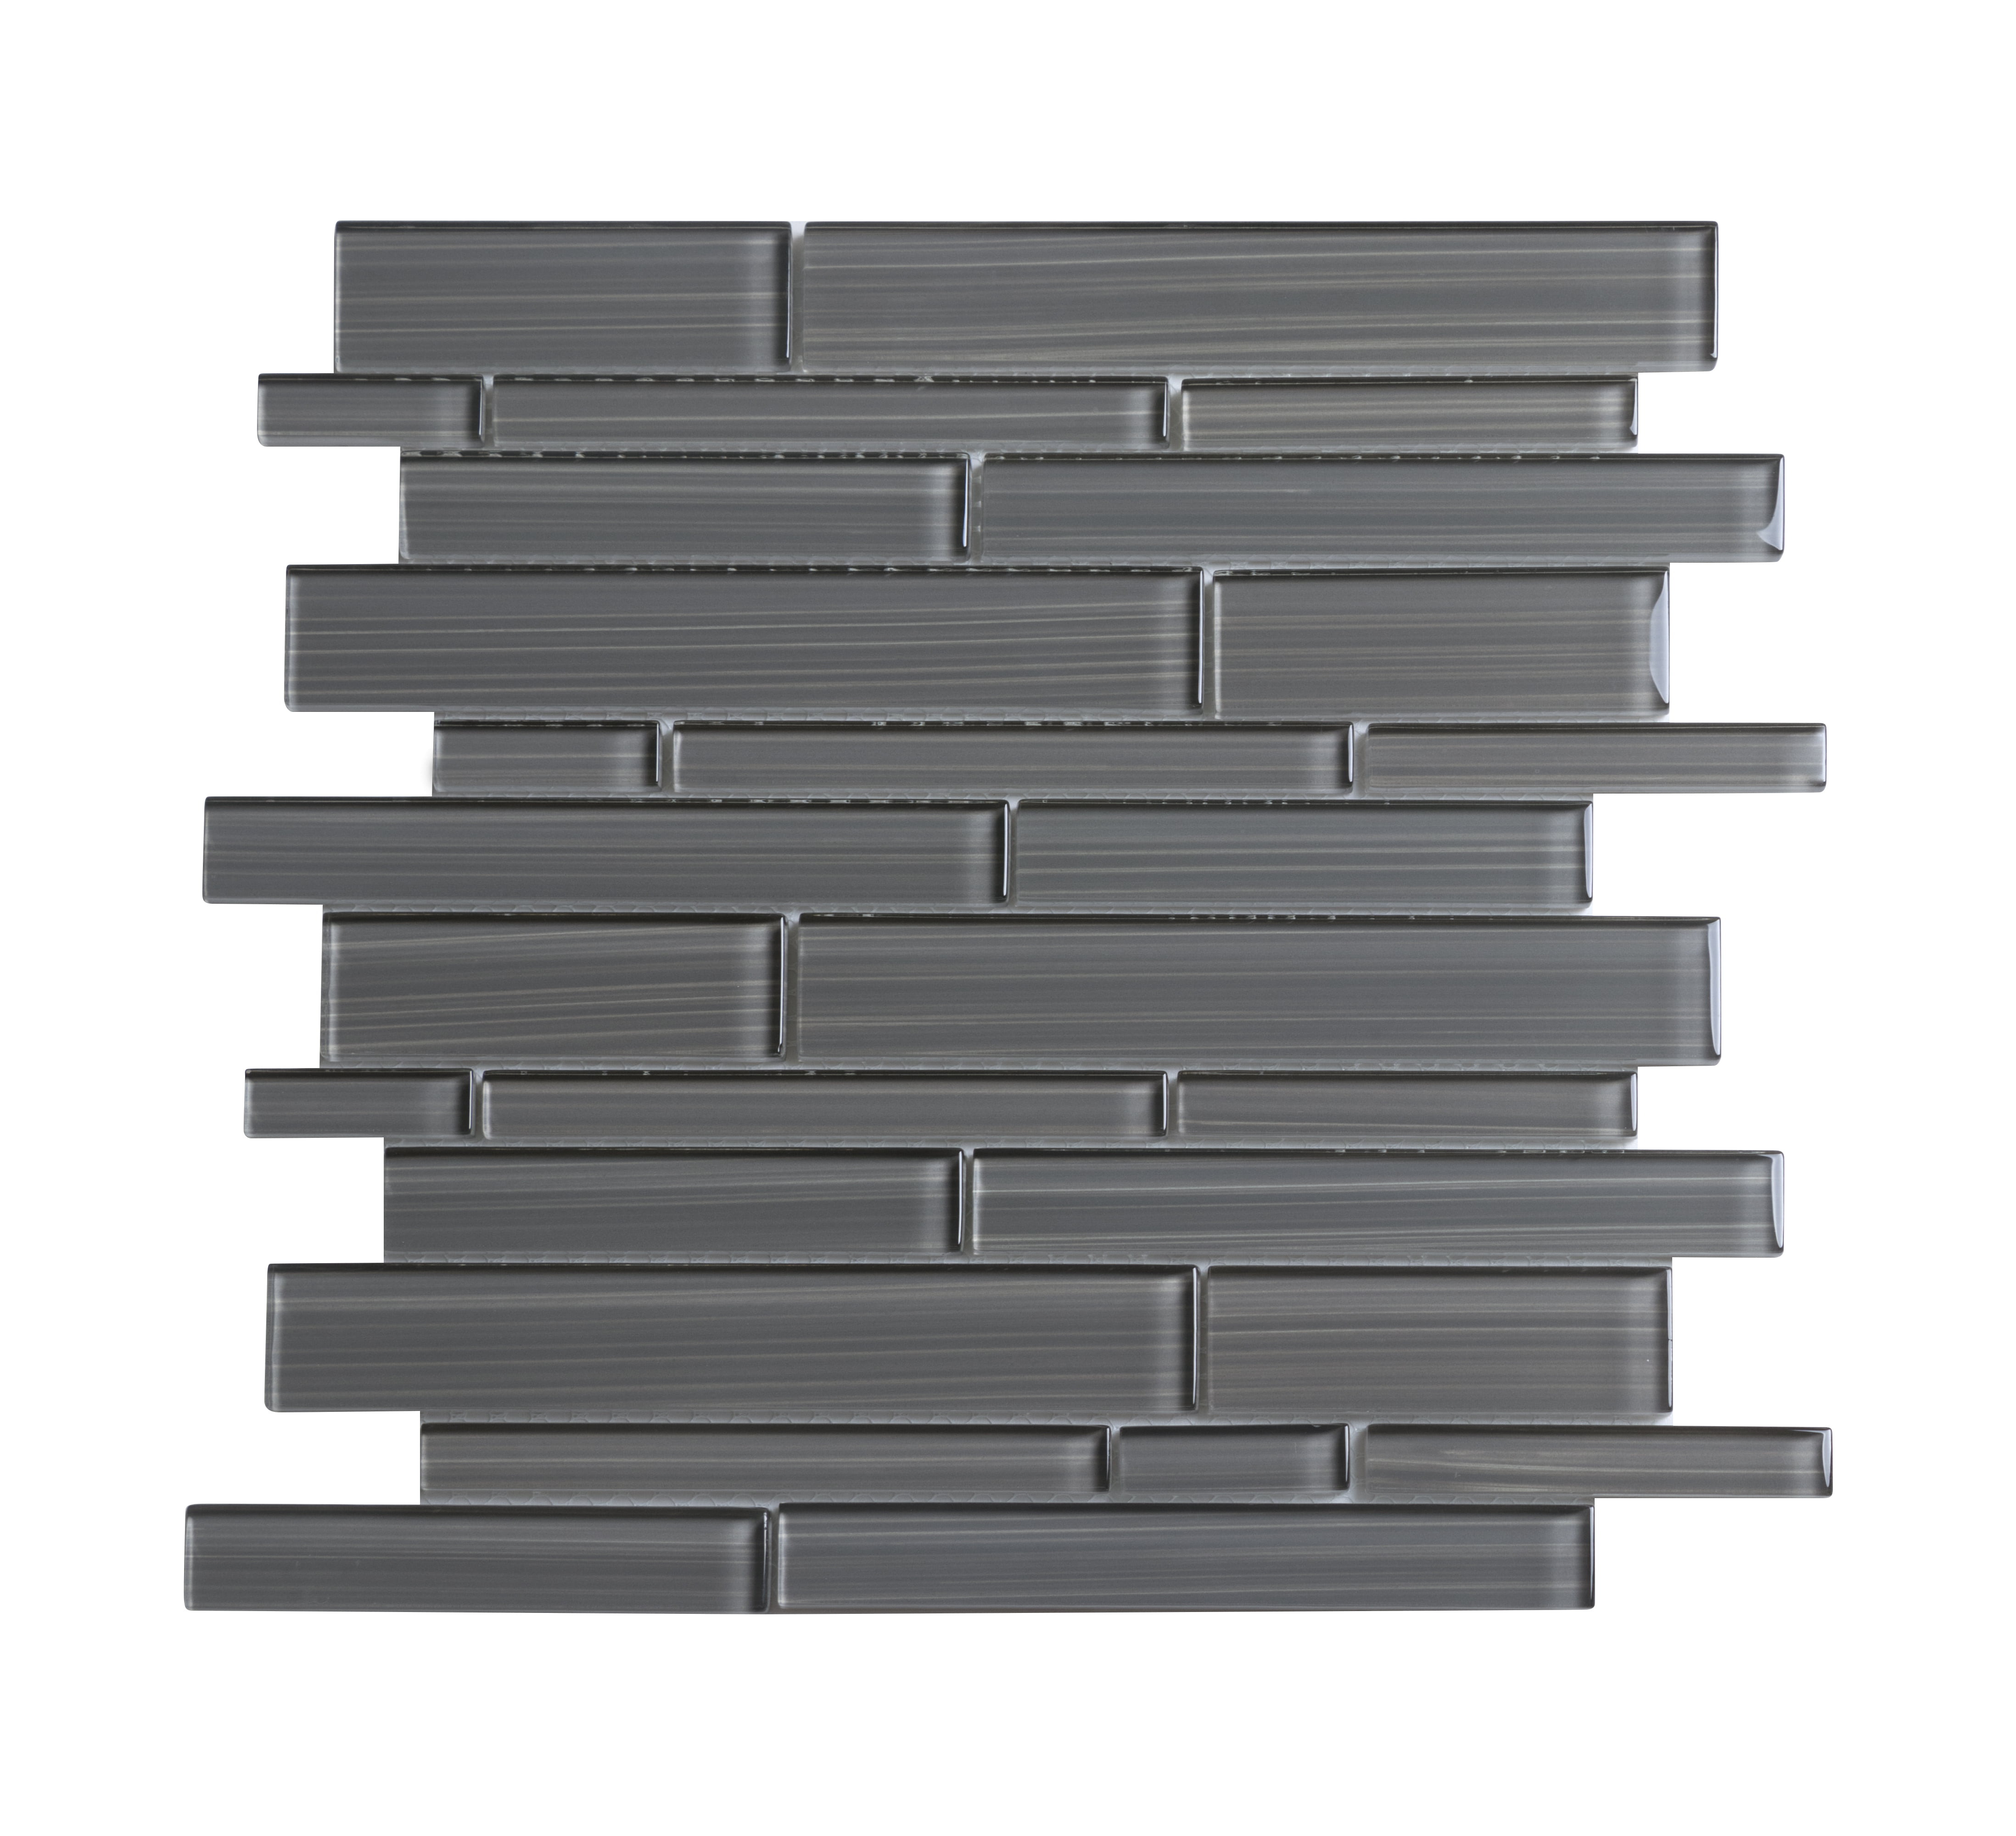 12 in x 12 in x 8mm Backsplash 2in x 12in Sample WS Tiles: 2 x 6’’ Subway/Brick Icy Gray Glass Mesh-Mounted Tile for Kitchen & Bathroom